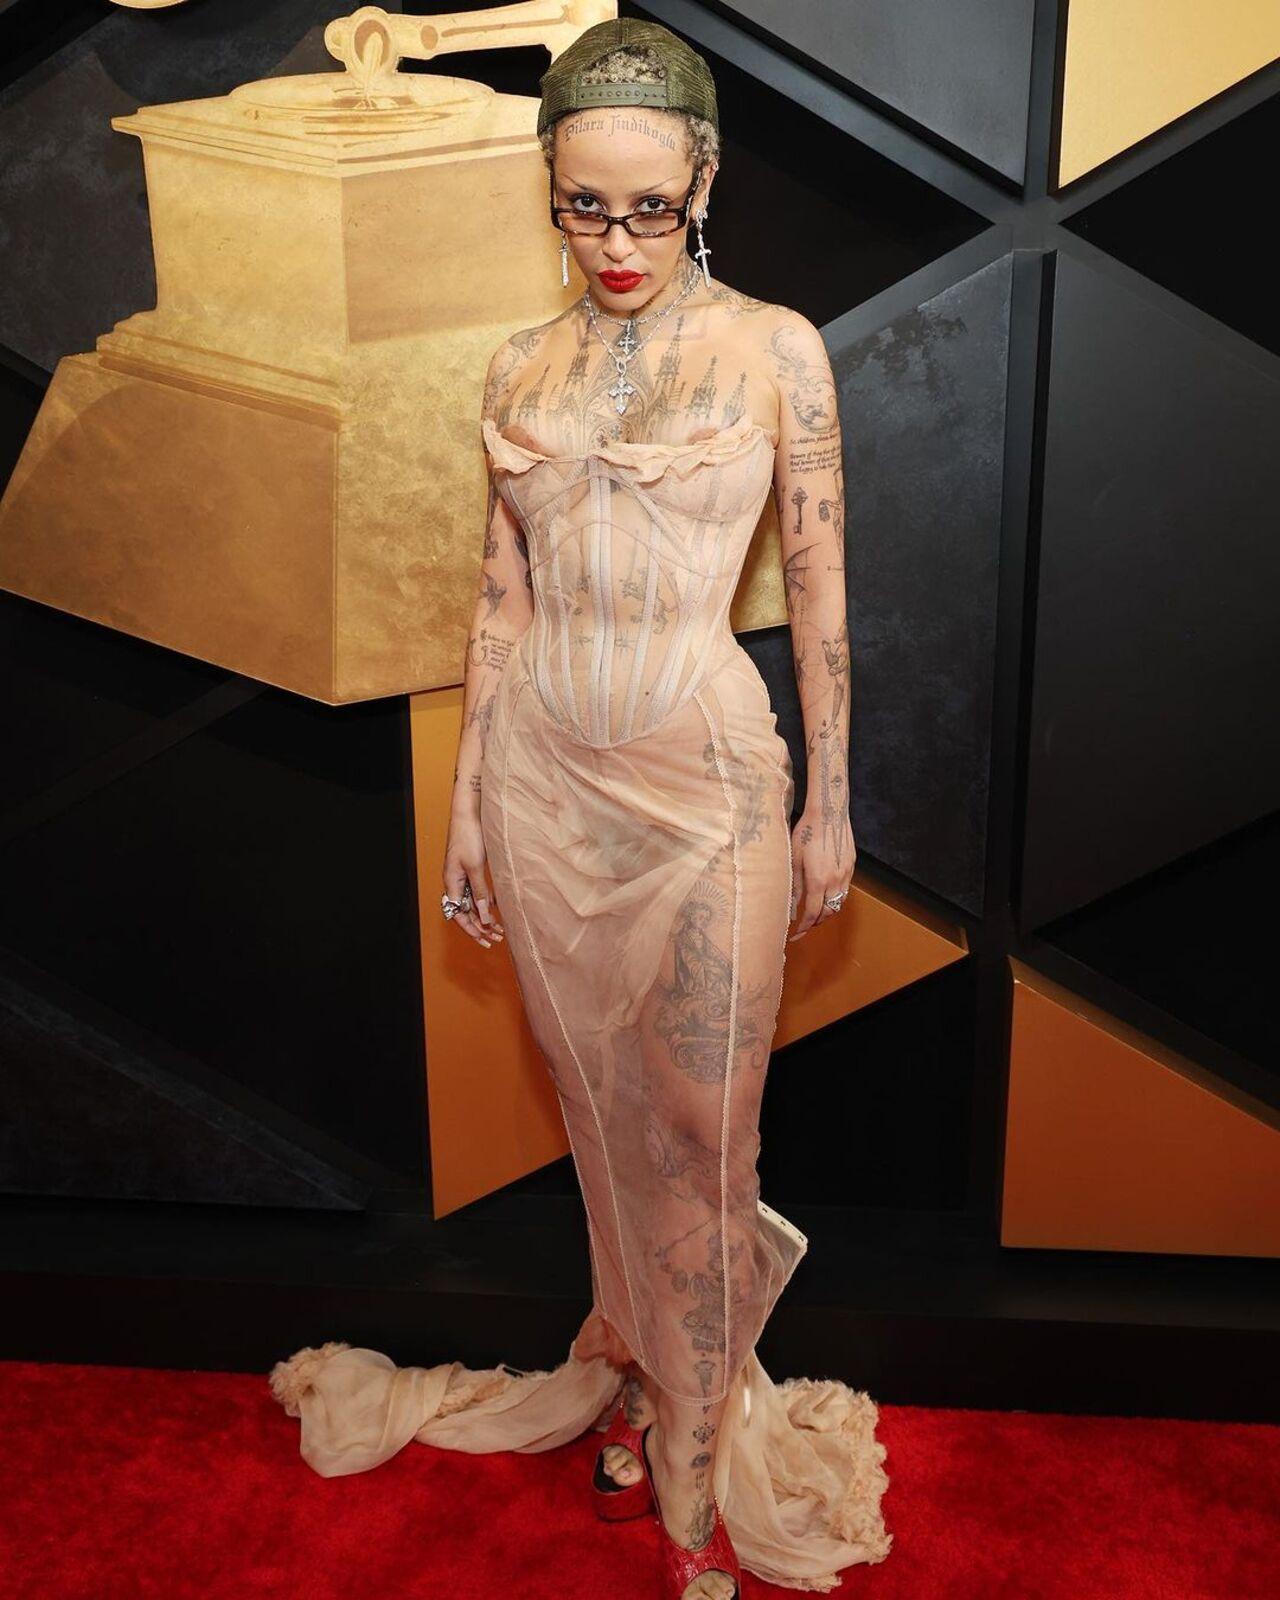 Doja Cat sure had heads turning in this Dilara Findikoglu dress. The see-through outfit well-complimented Doja's curvy body. The glasses only made the overall look distinct